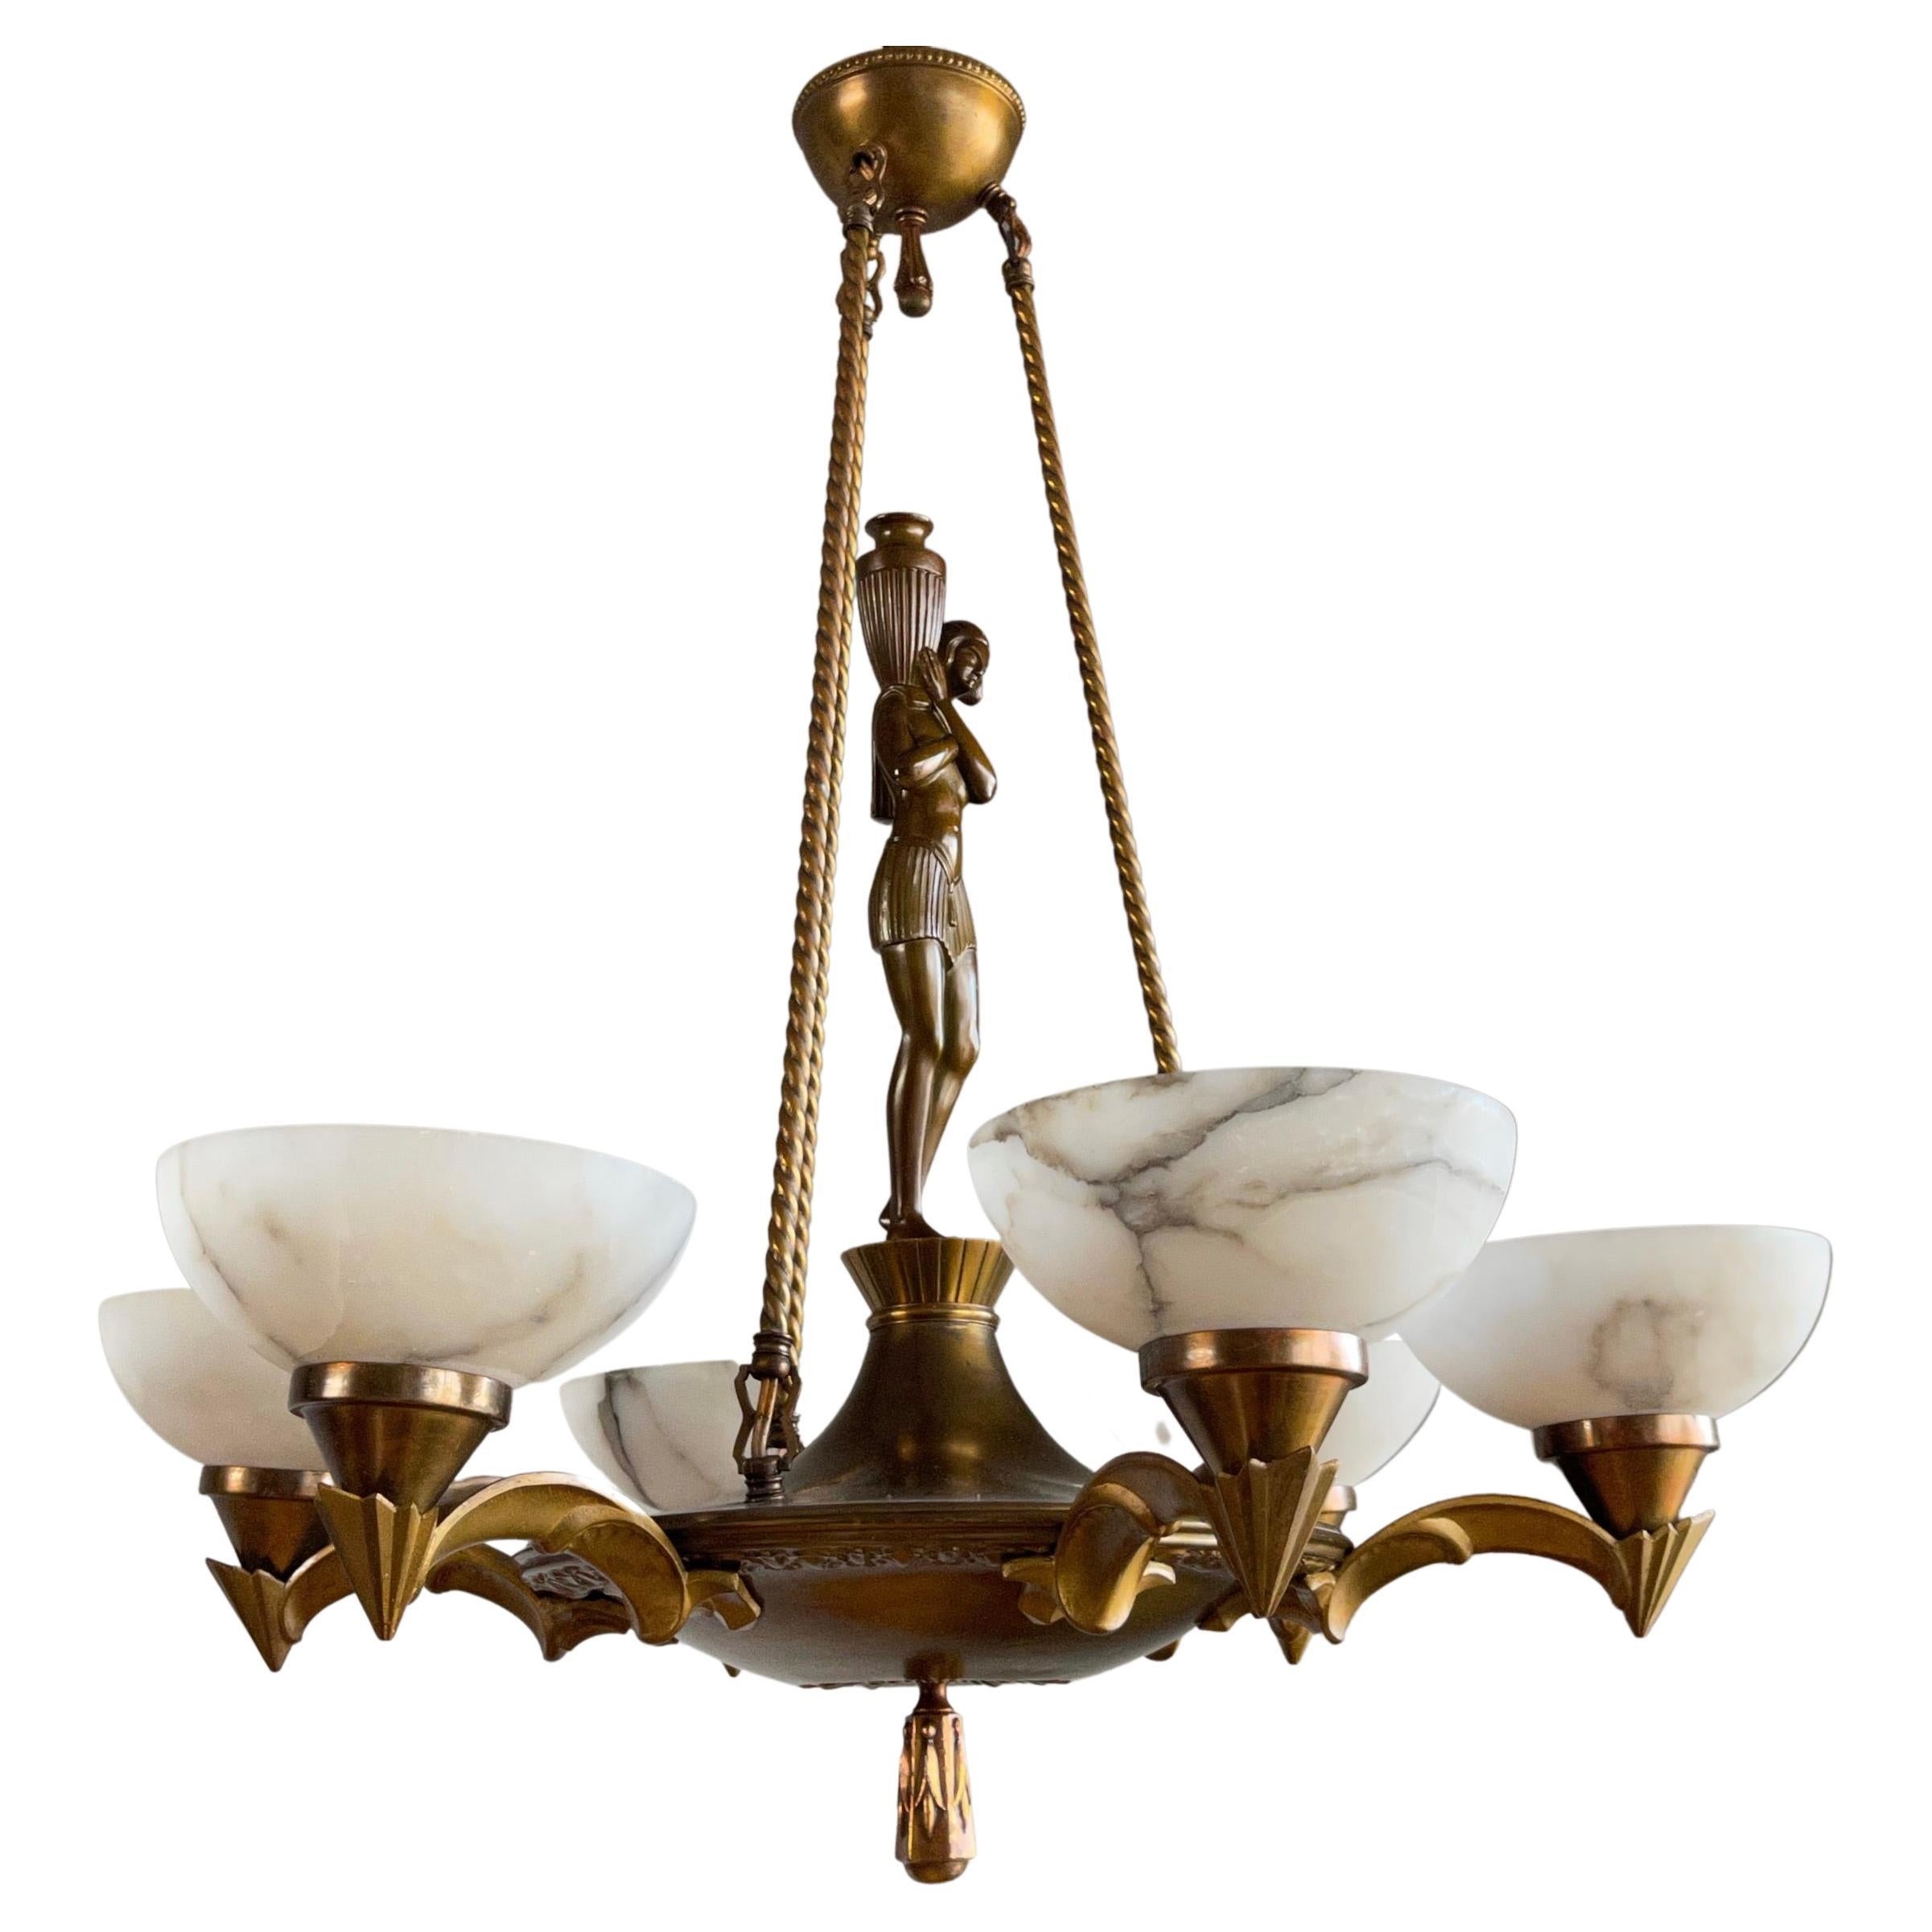 Pure and Stylish Art Deco Sculpture Chandelier w Stunning Alabaster Shades 1920s For Sale